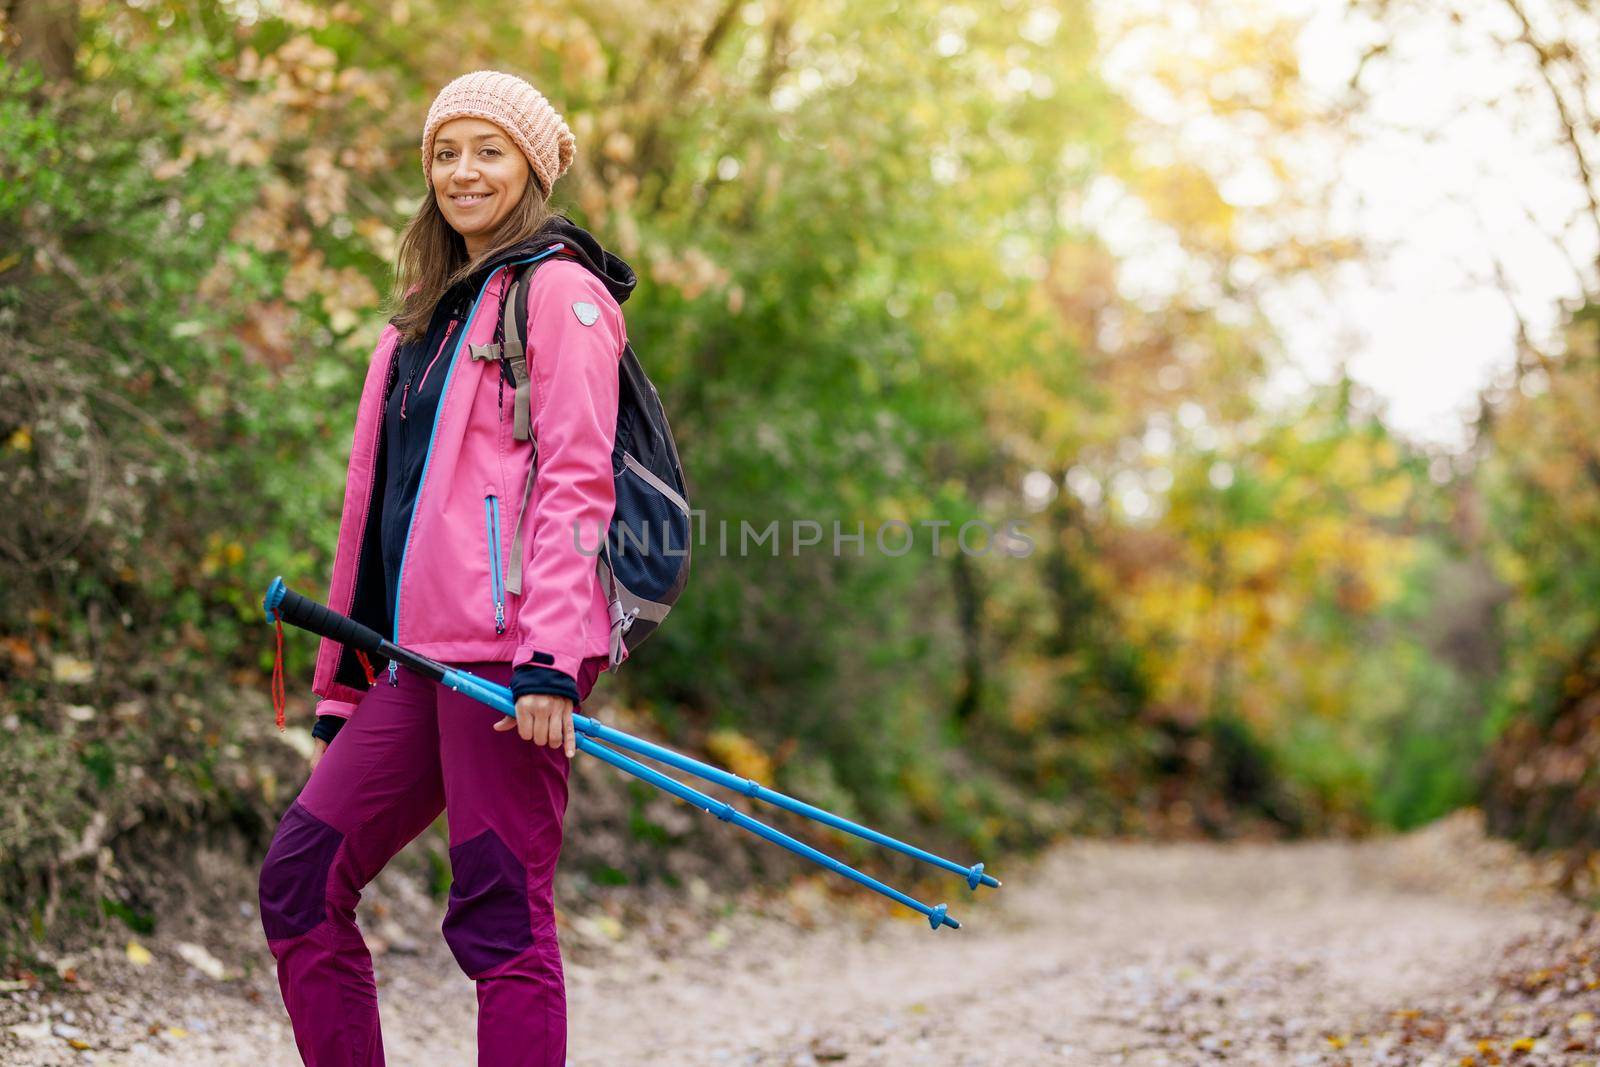 Hiker girl standing on a wide trail in the mountains. Backpacker with pink jacket in a forest. Healthy fitness lifestyle outdoors.